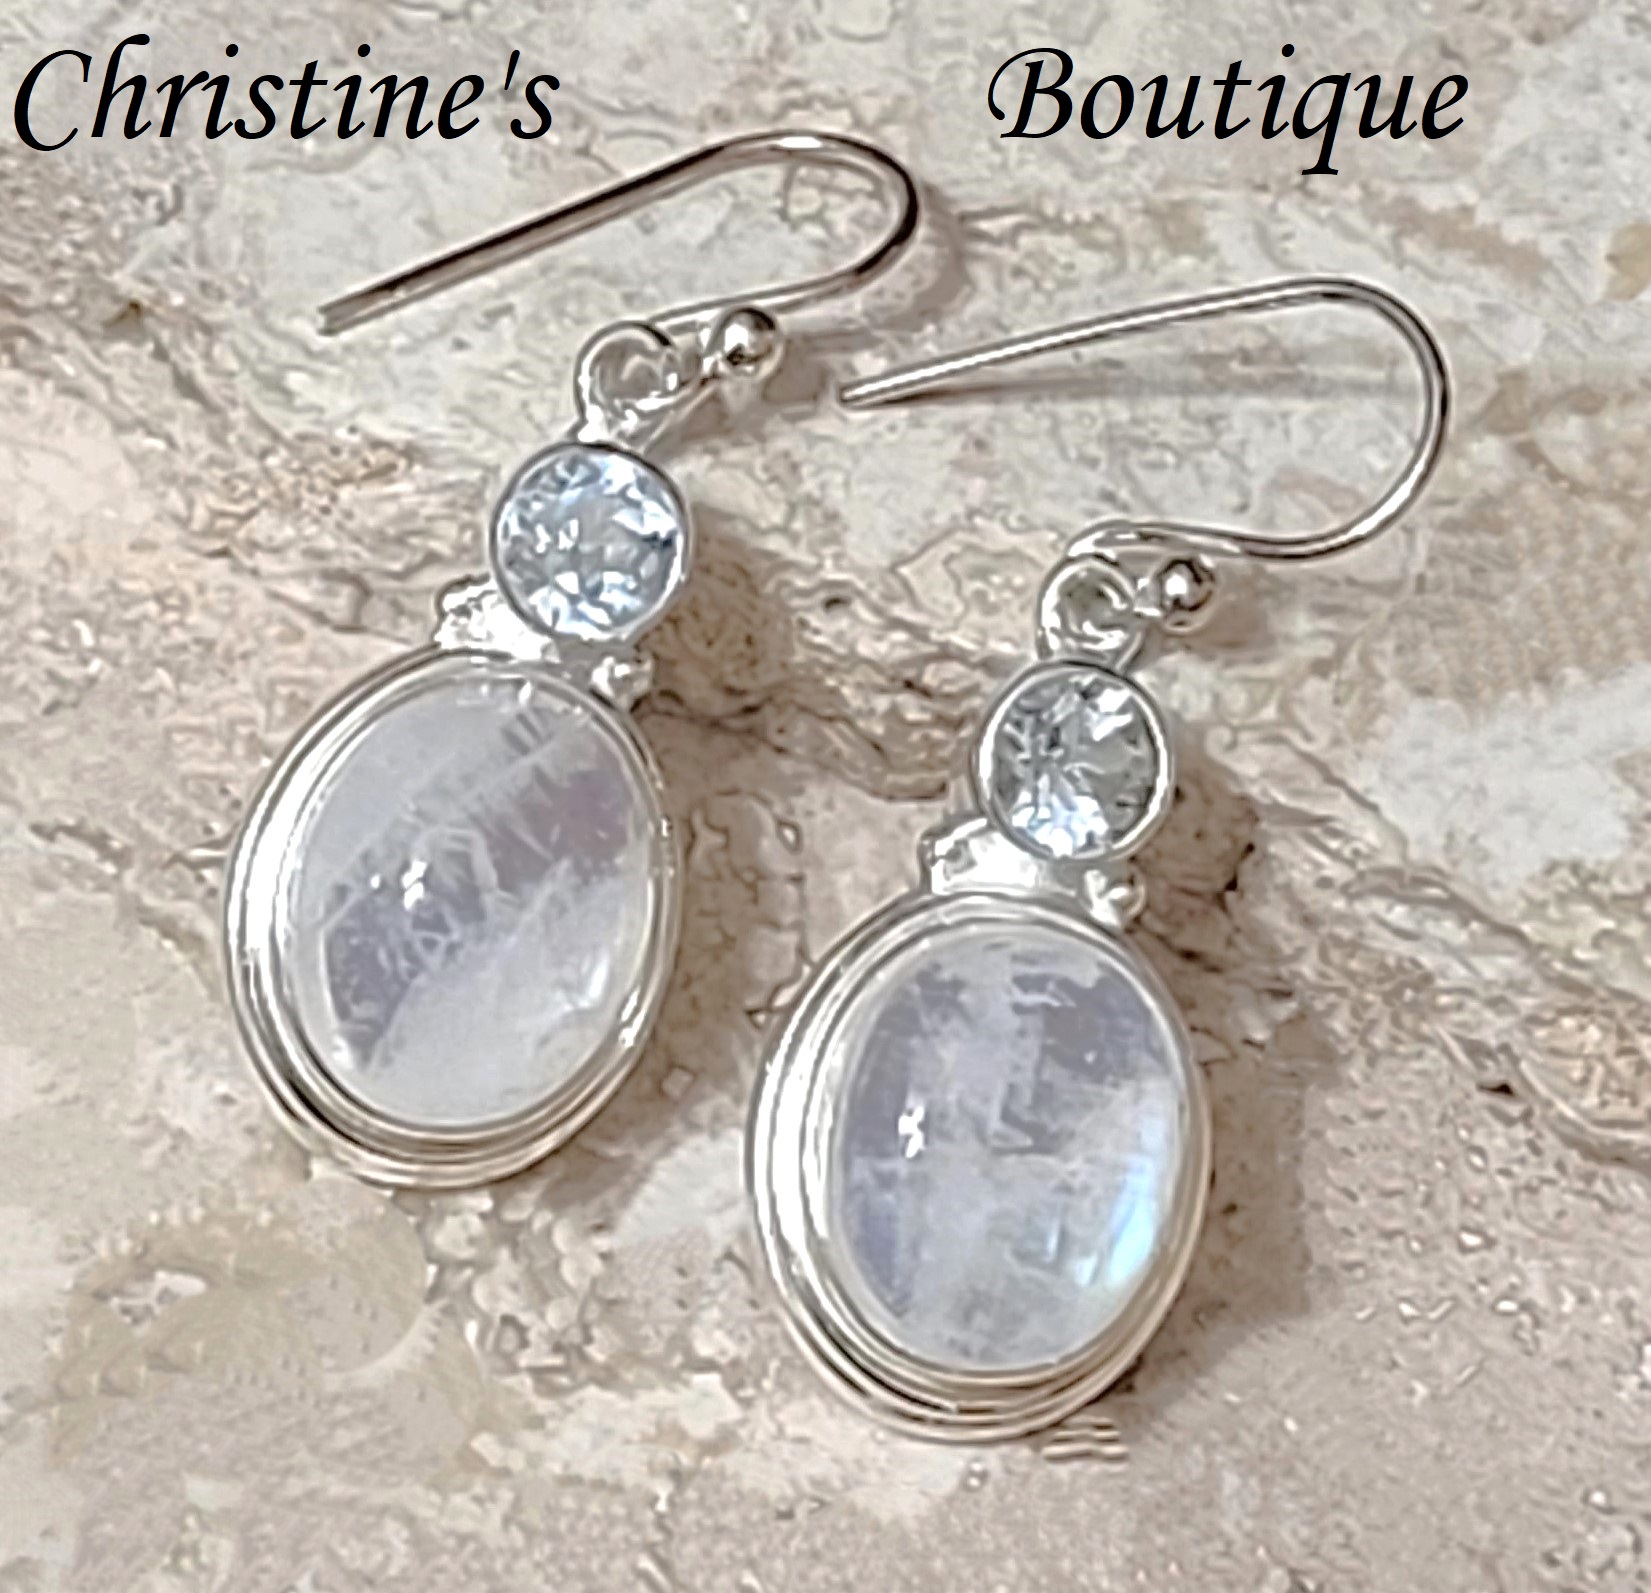 Moonstone earrings with blue topaz gemstone, 925 sterling silver earrings - Click Image to Close